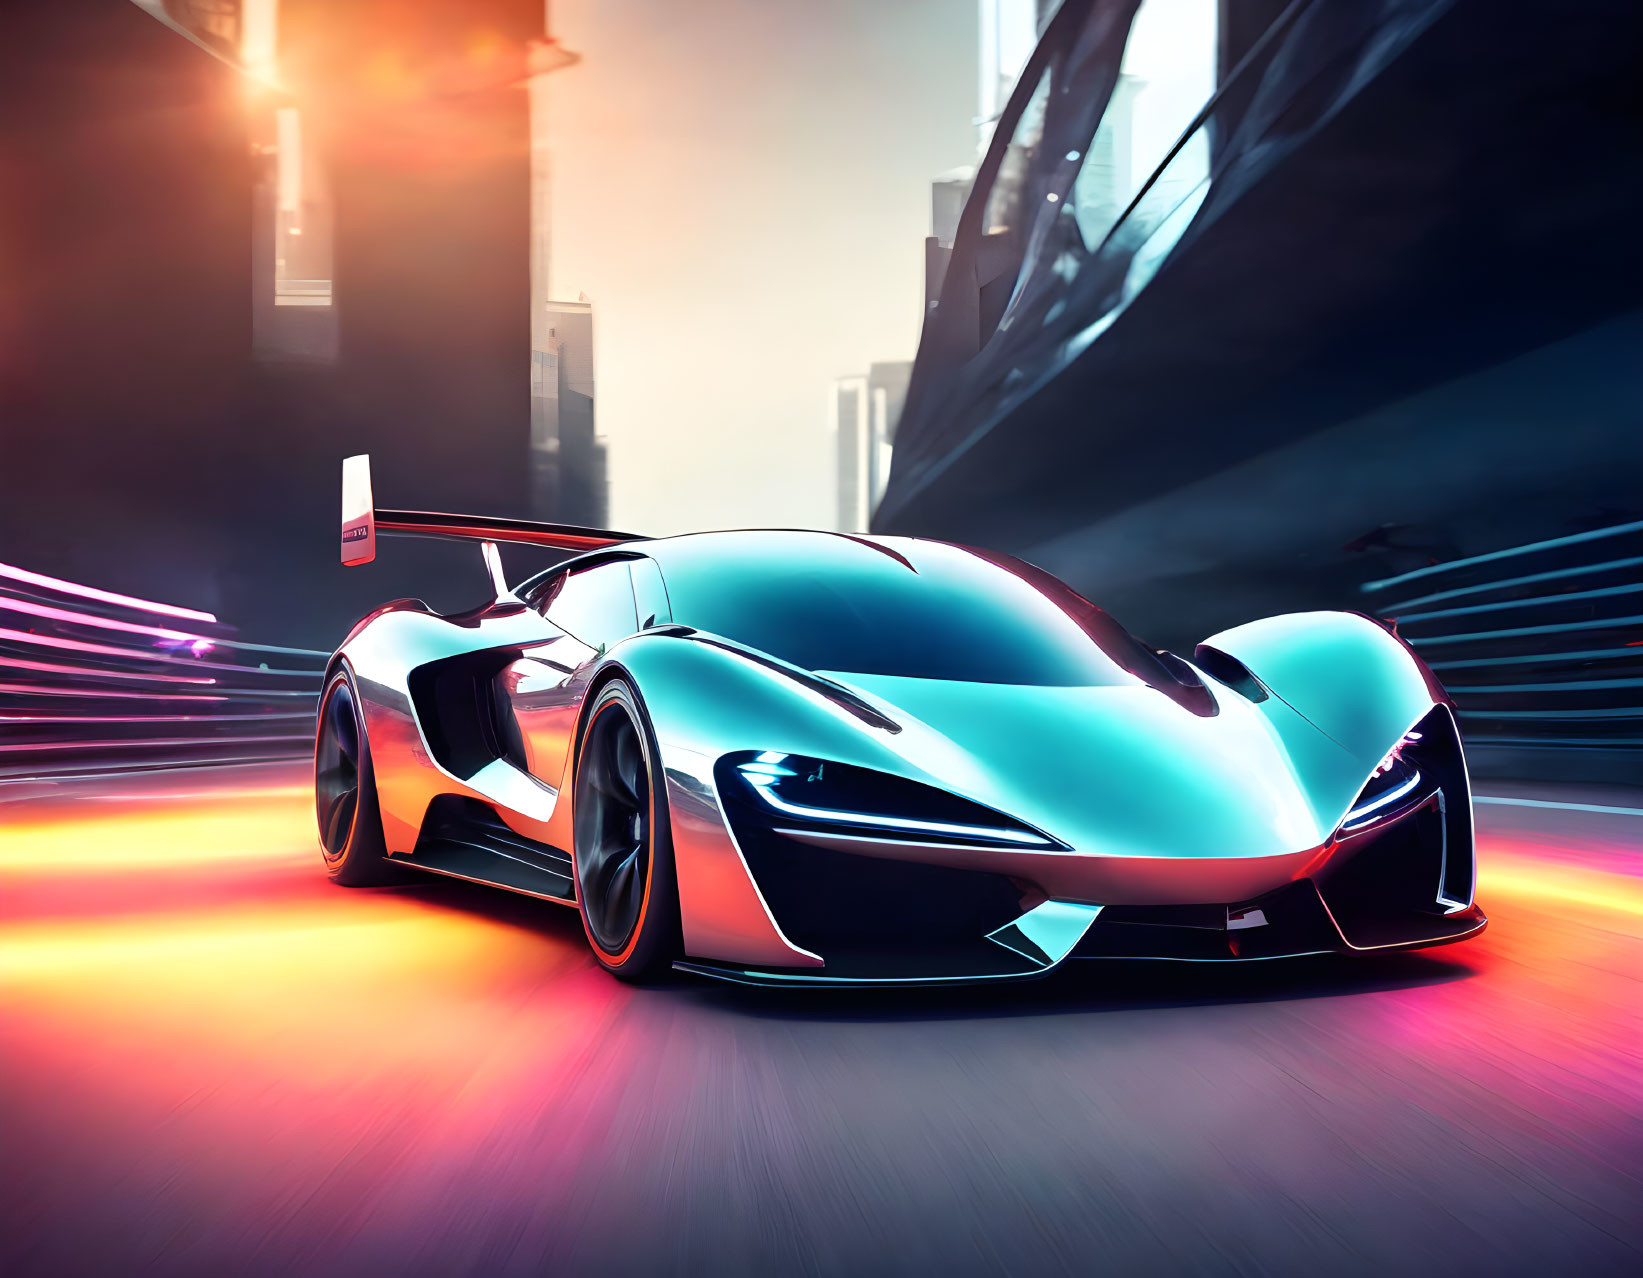 Futuristic sports car with rear spoiler in neon-lit city street